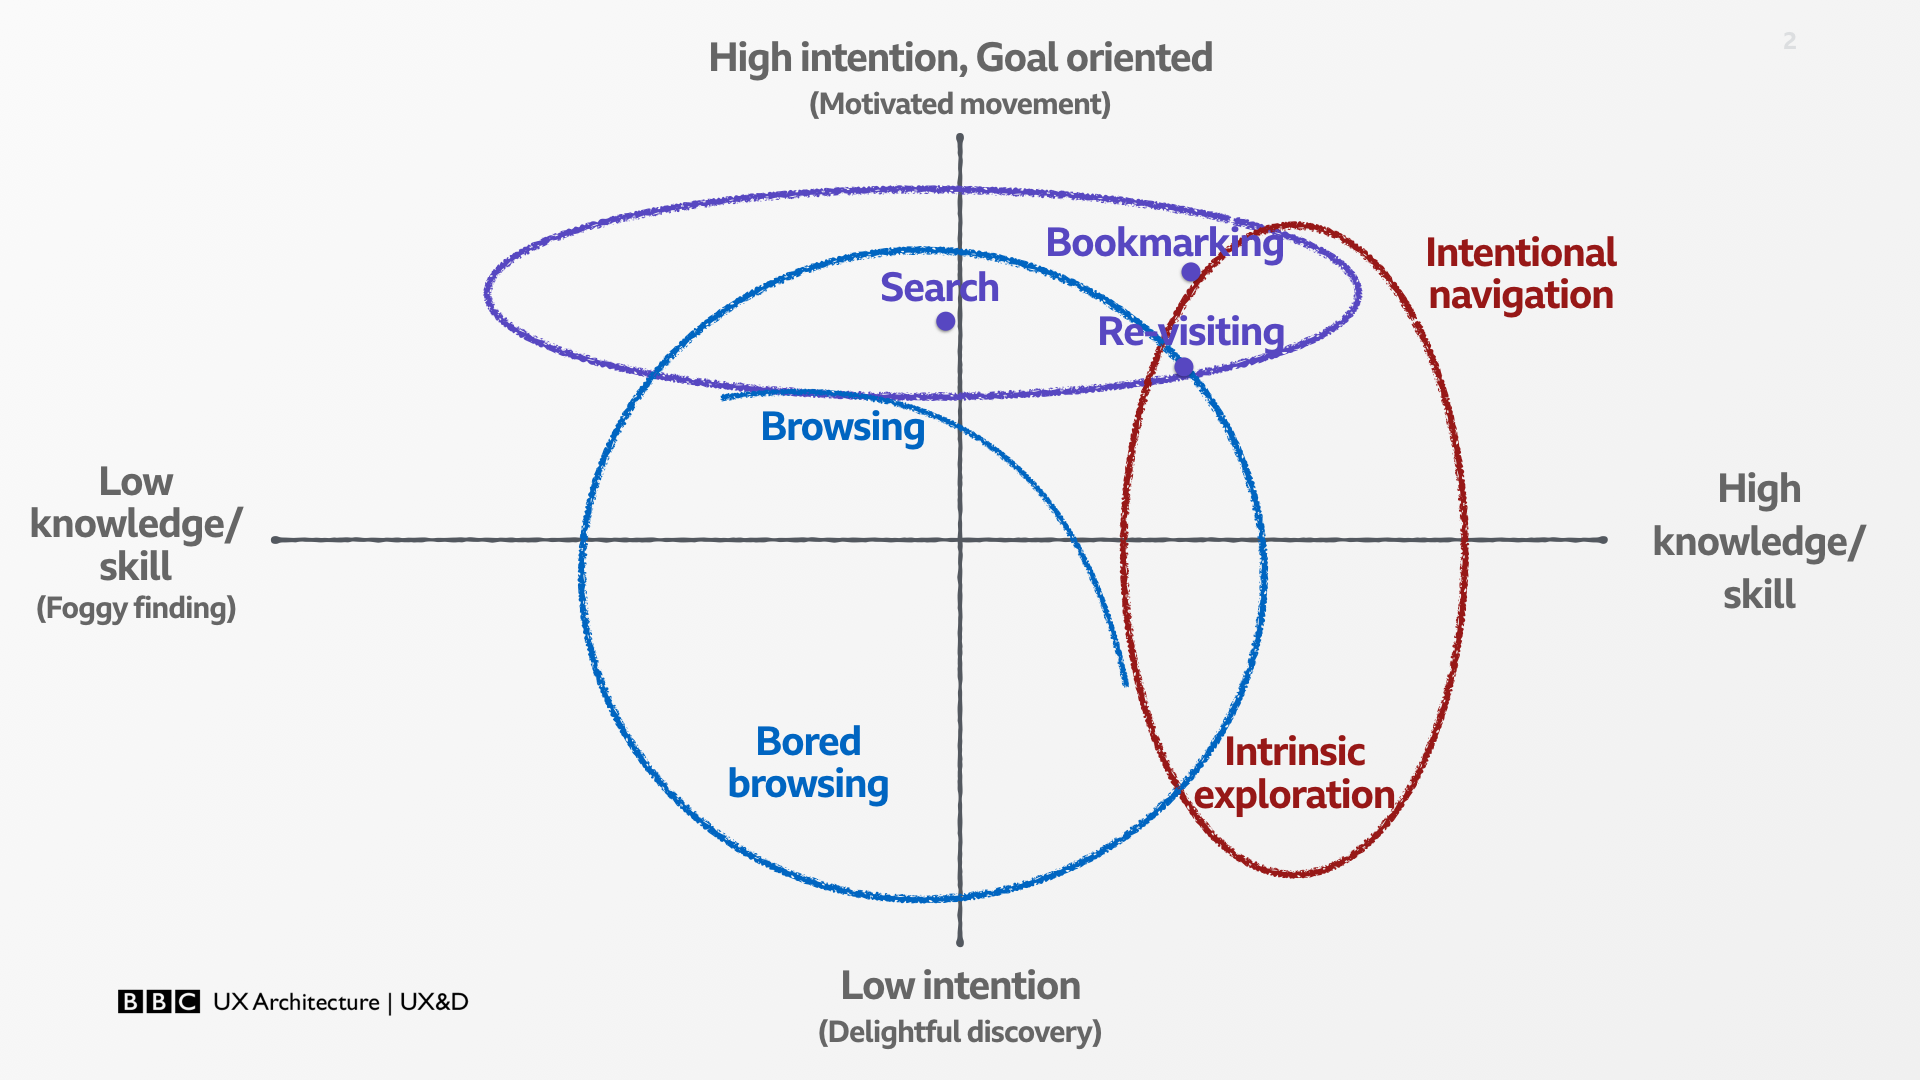 Navigation, content and interactions – a model using intention and ability